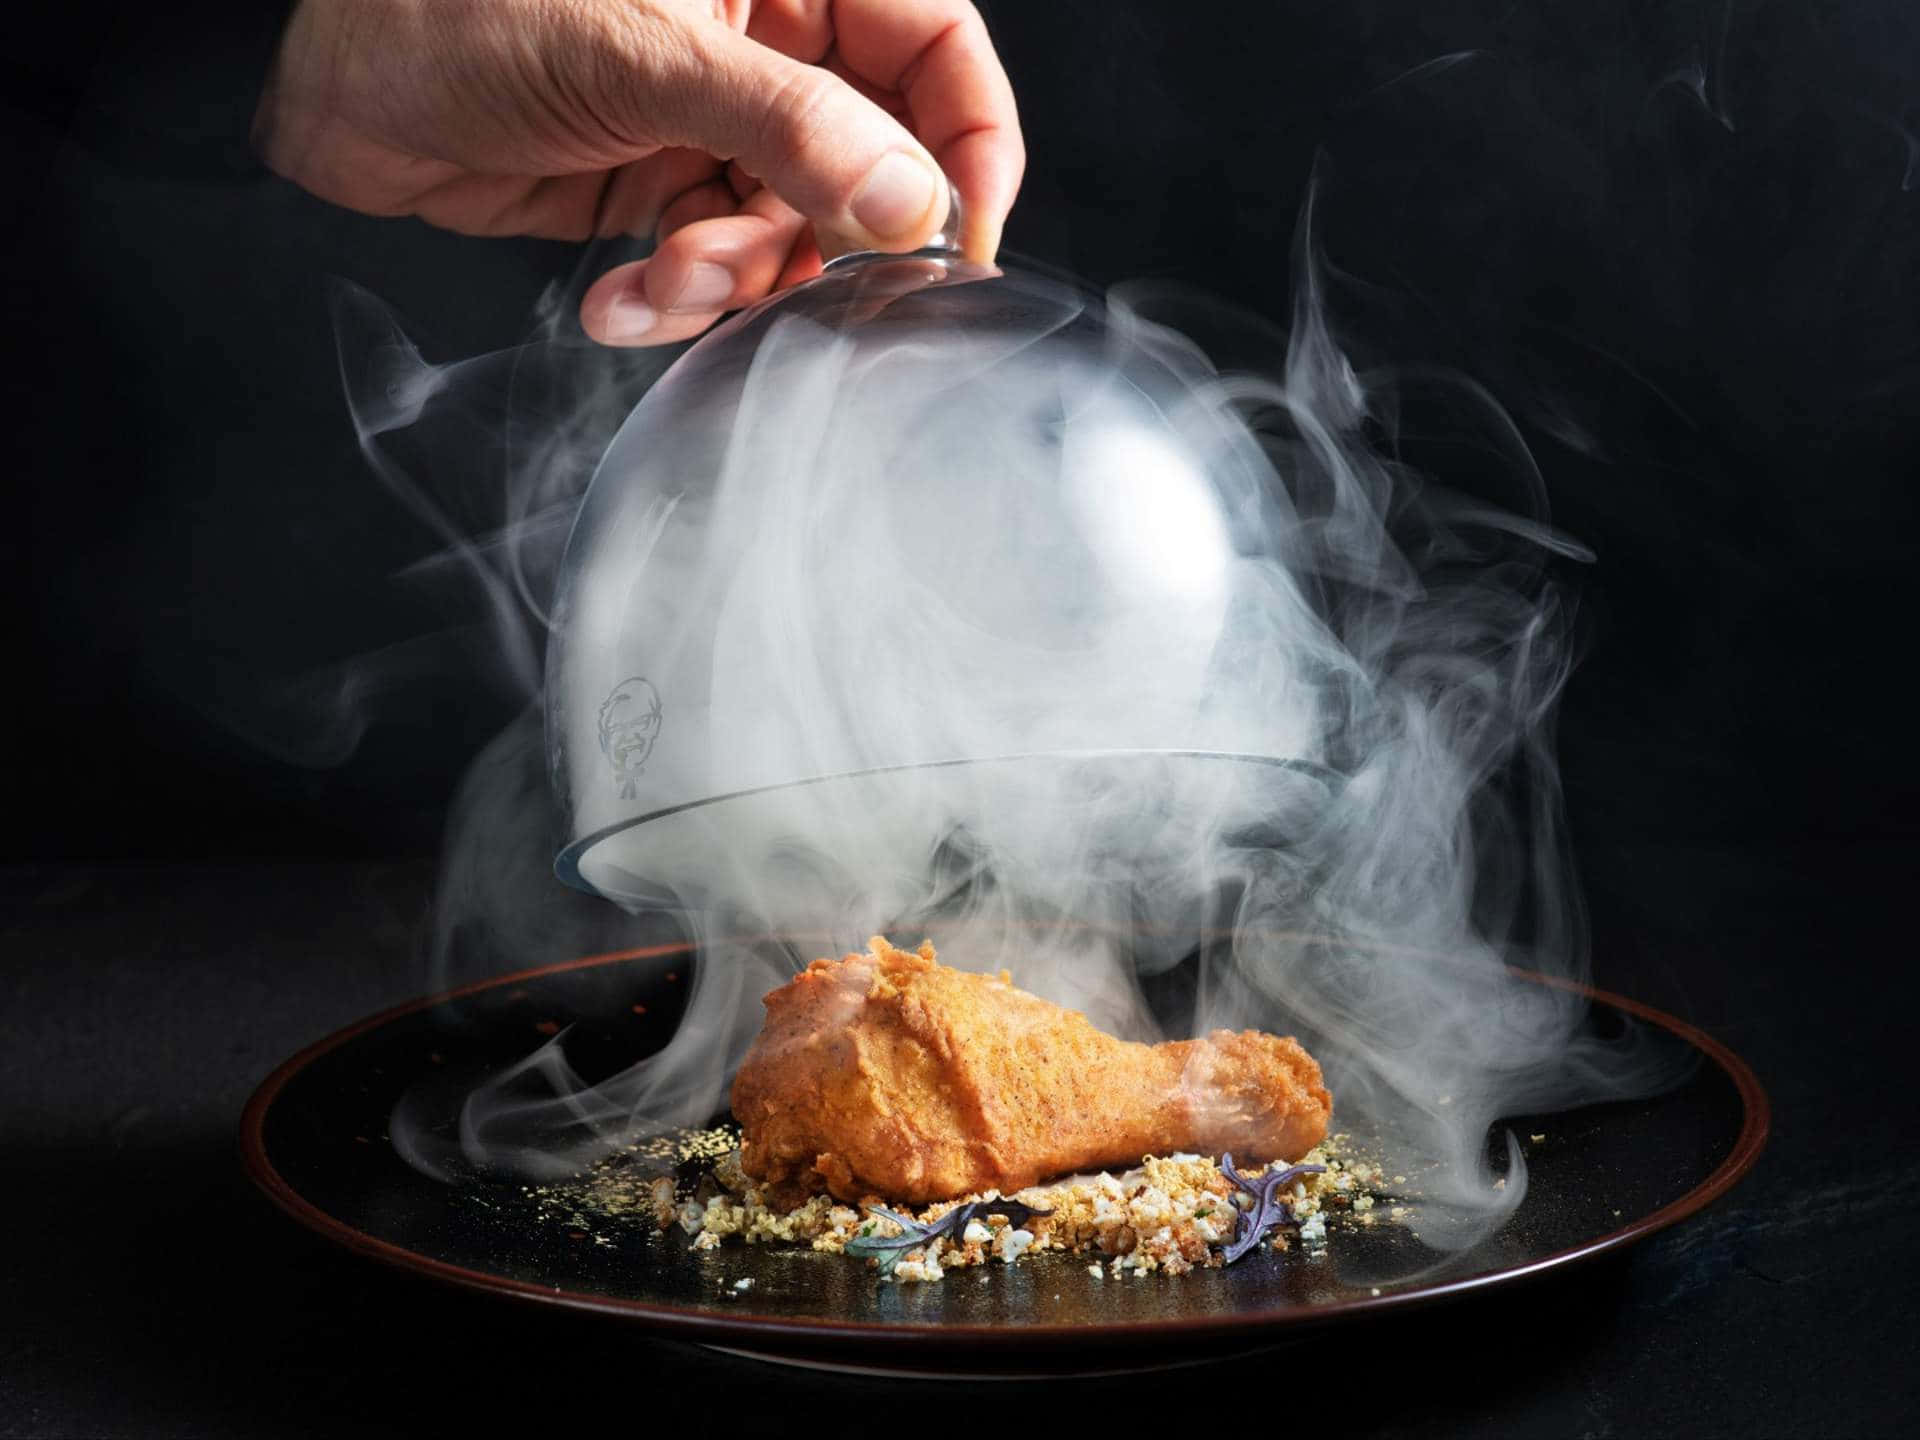 A Person Is Putting Food On A Plate With Smoke Coming Out Of It